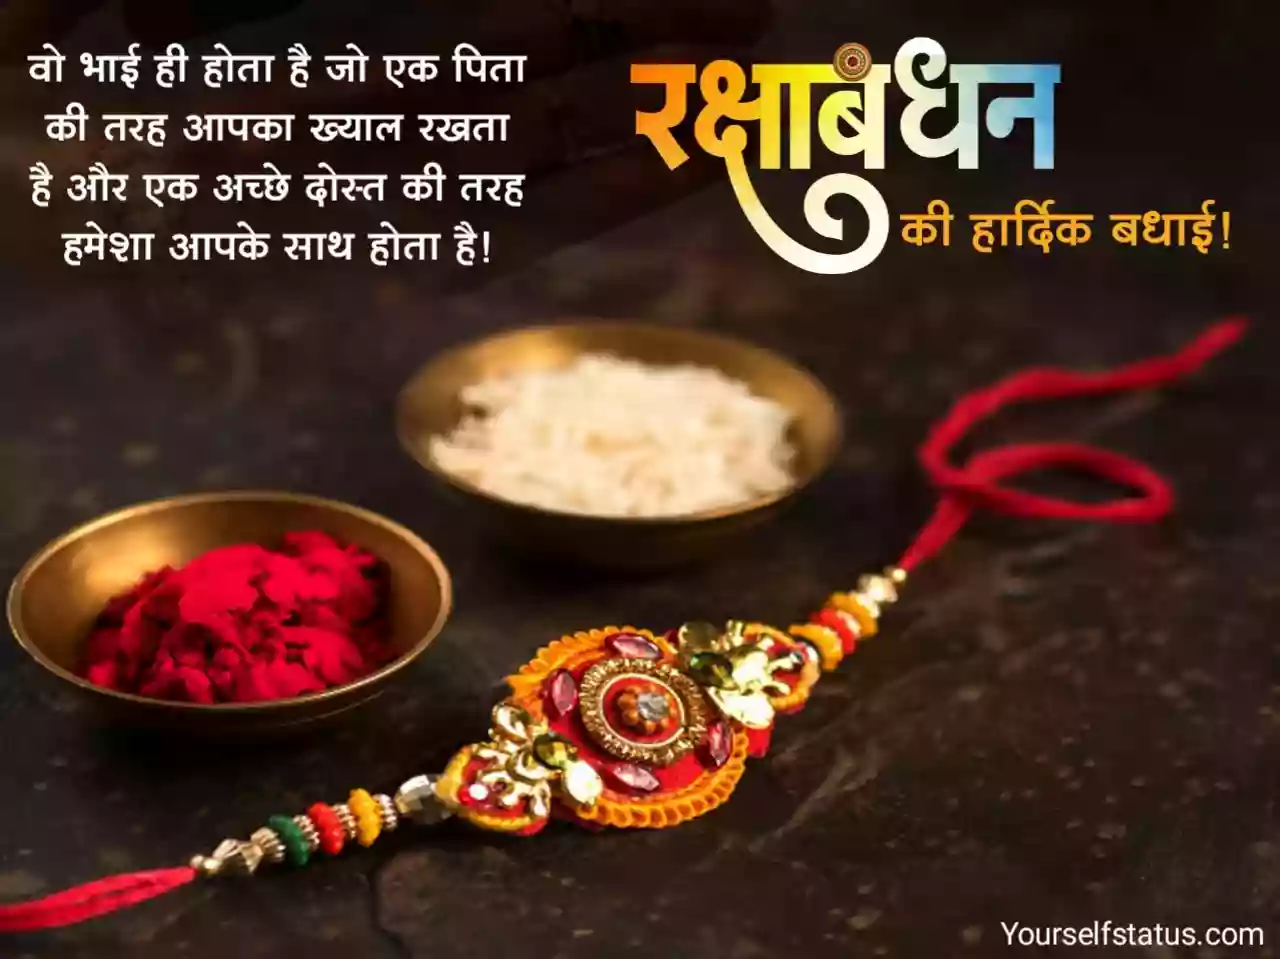 Raksha bandhan quotes for brother in hindi with images